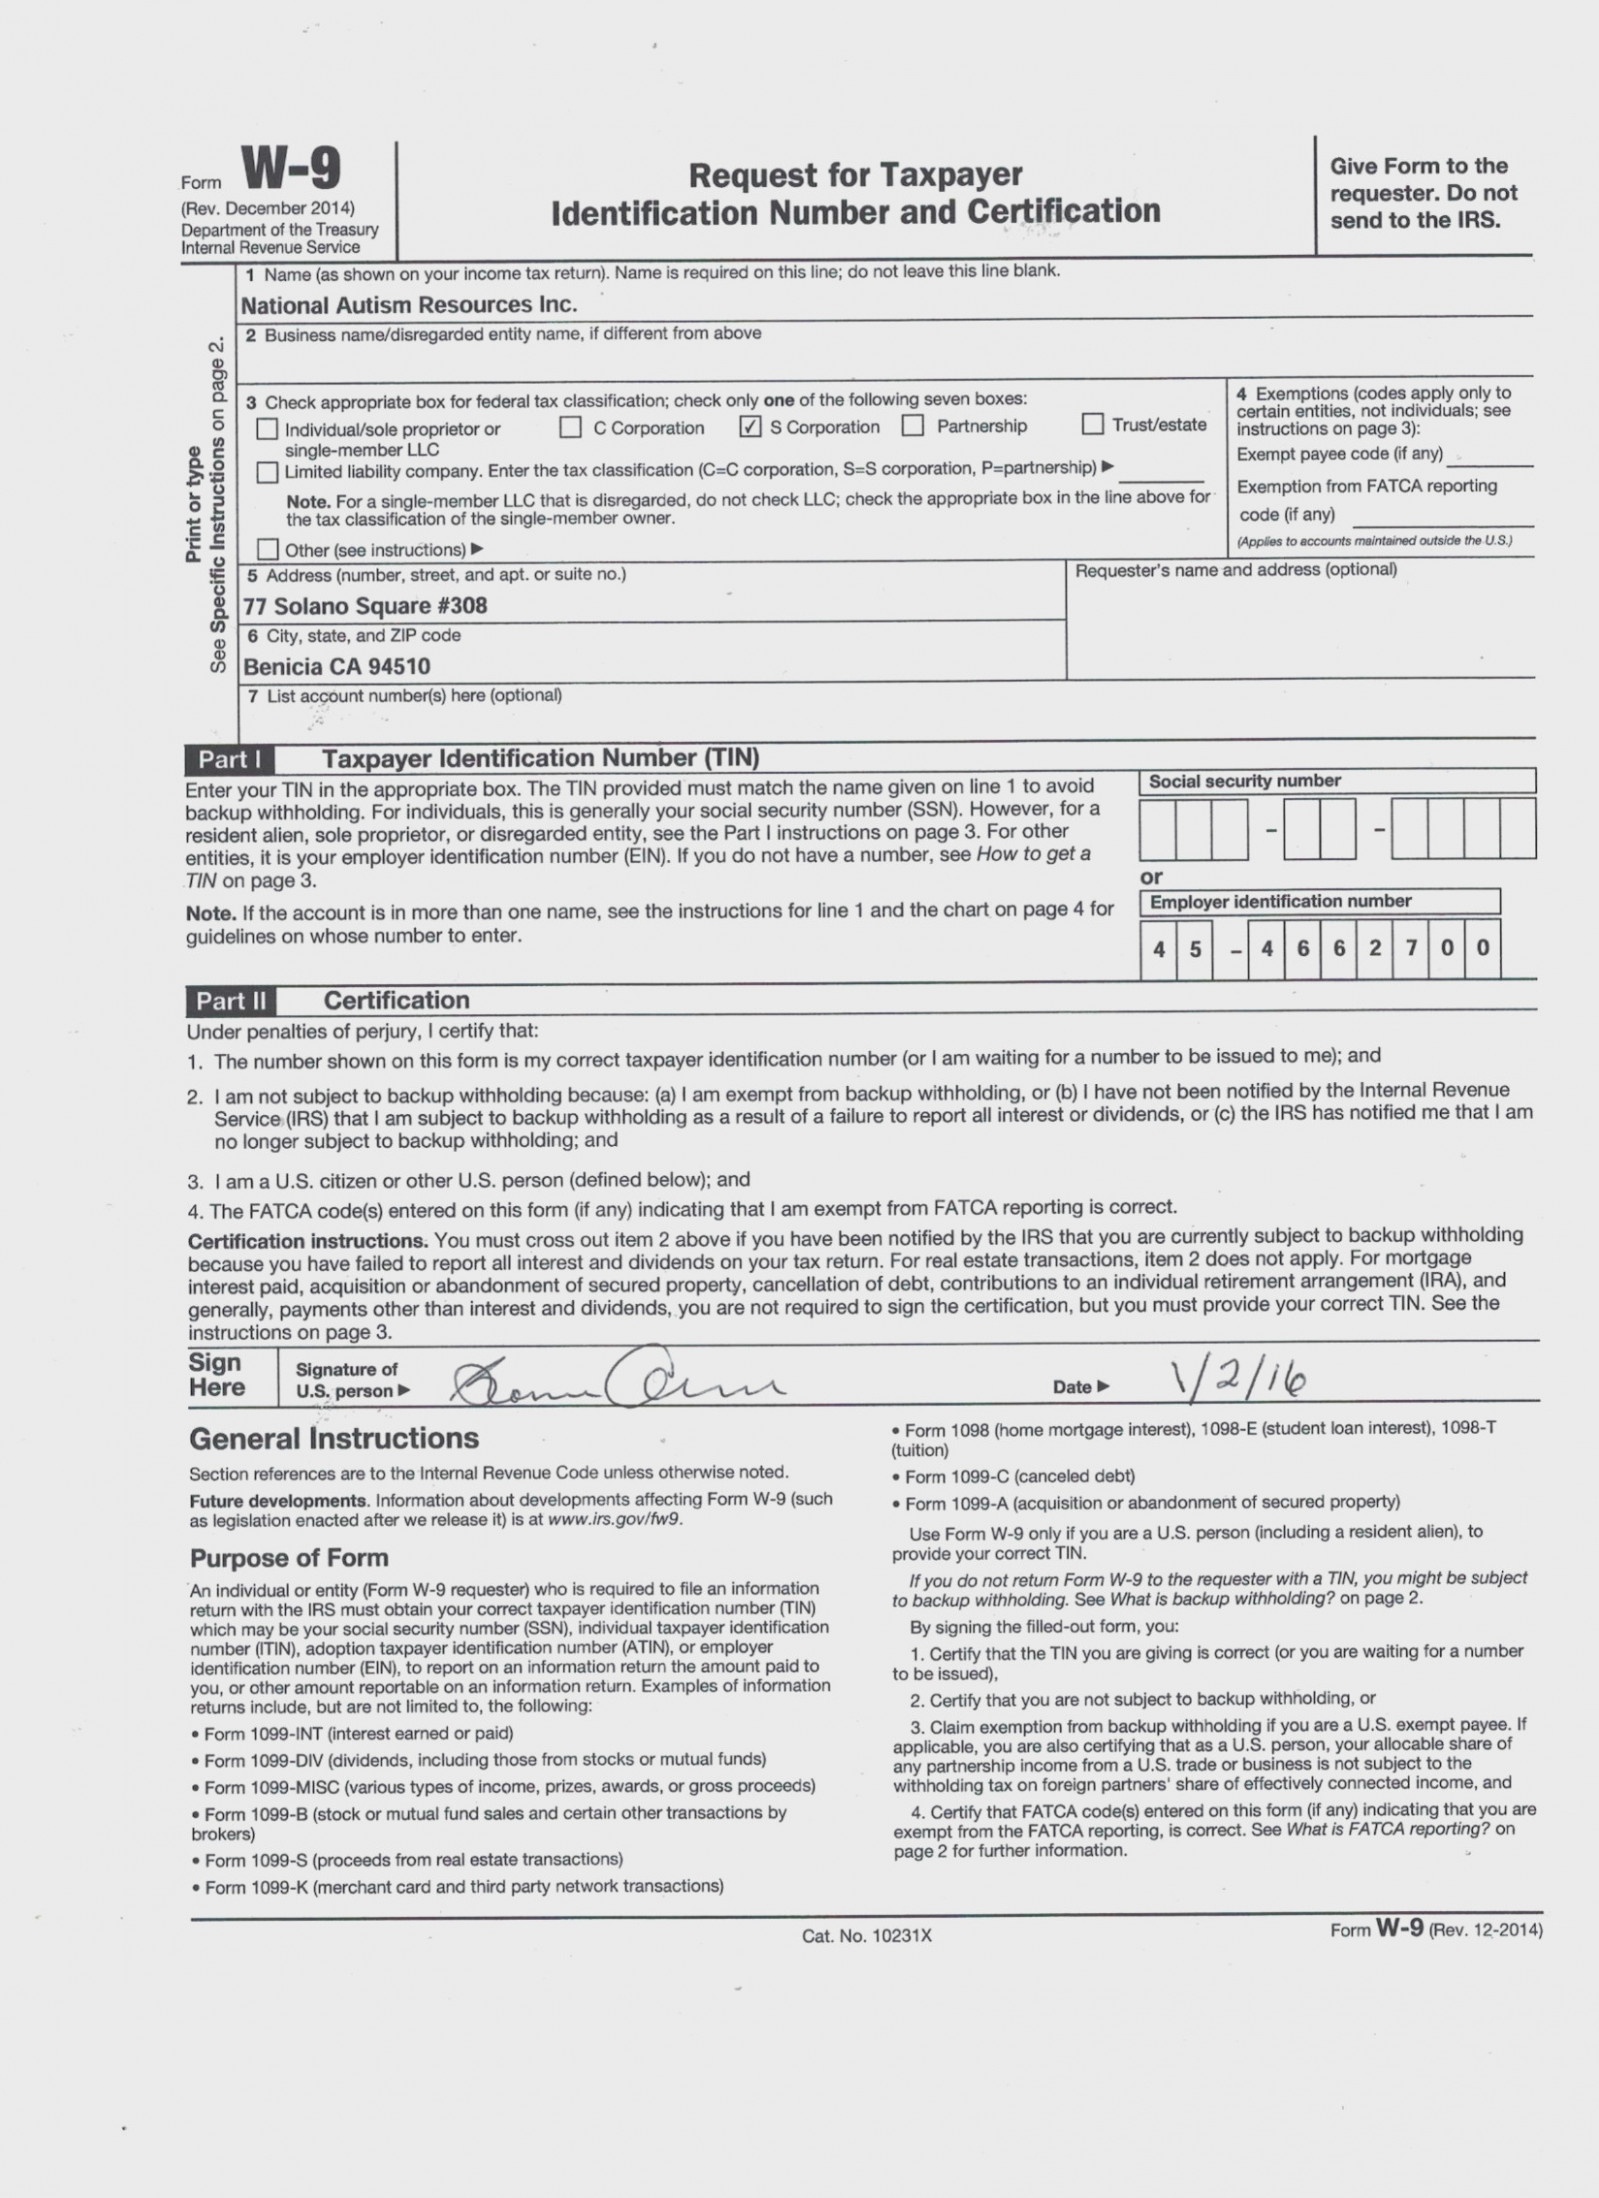 You Will Never Believe Realty Executives Mi Invoice And Resume Free Printable W 9 Form 8179